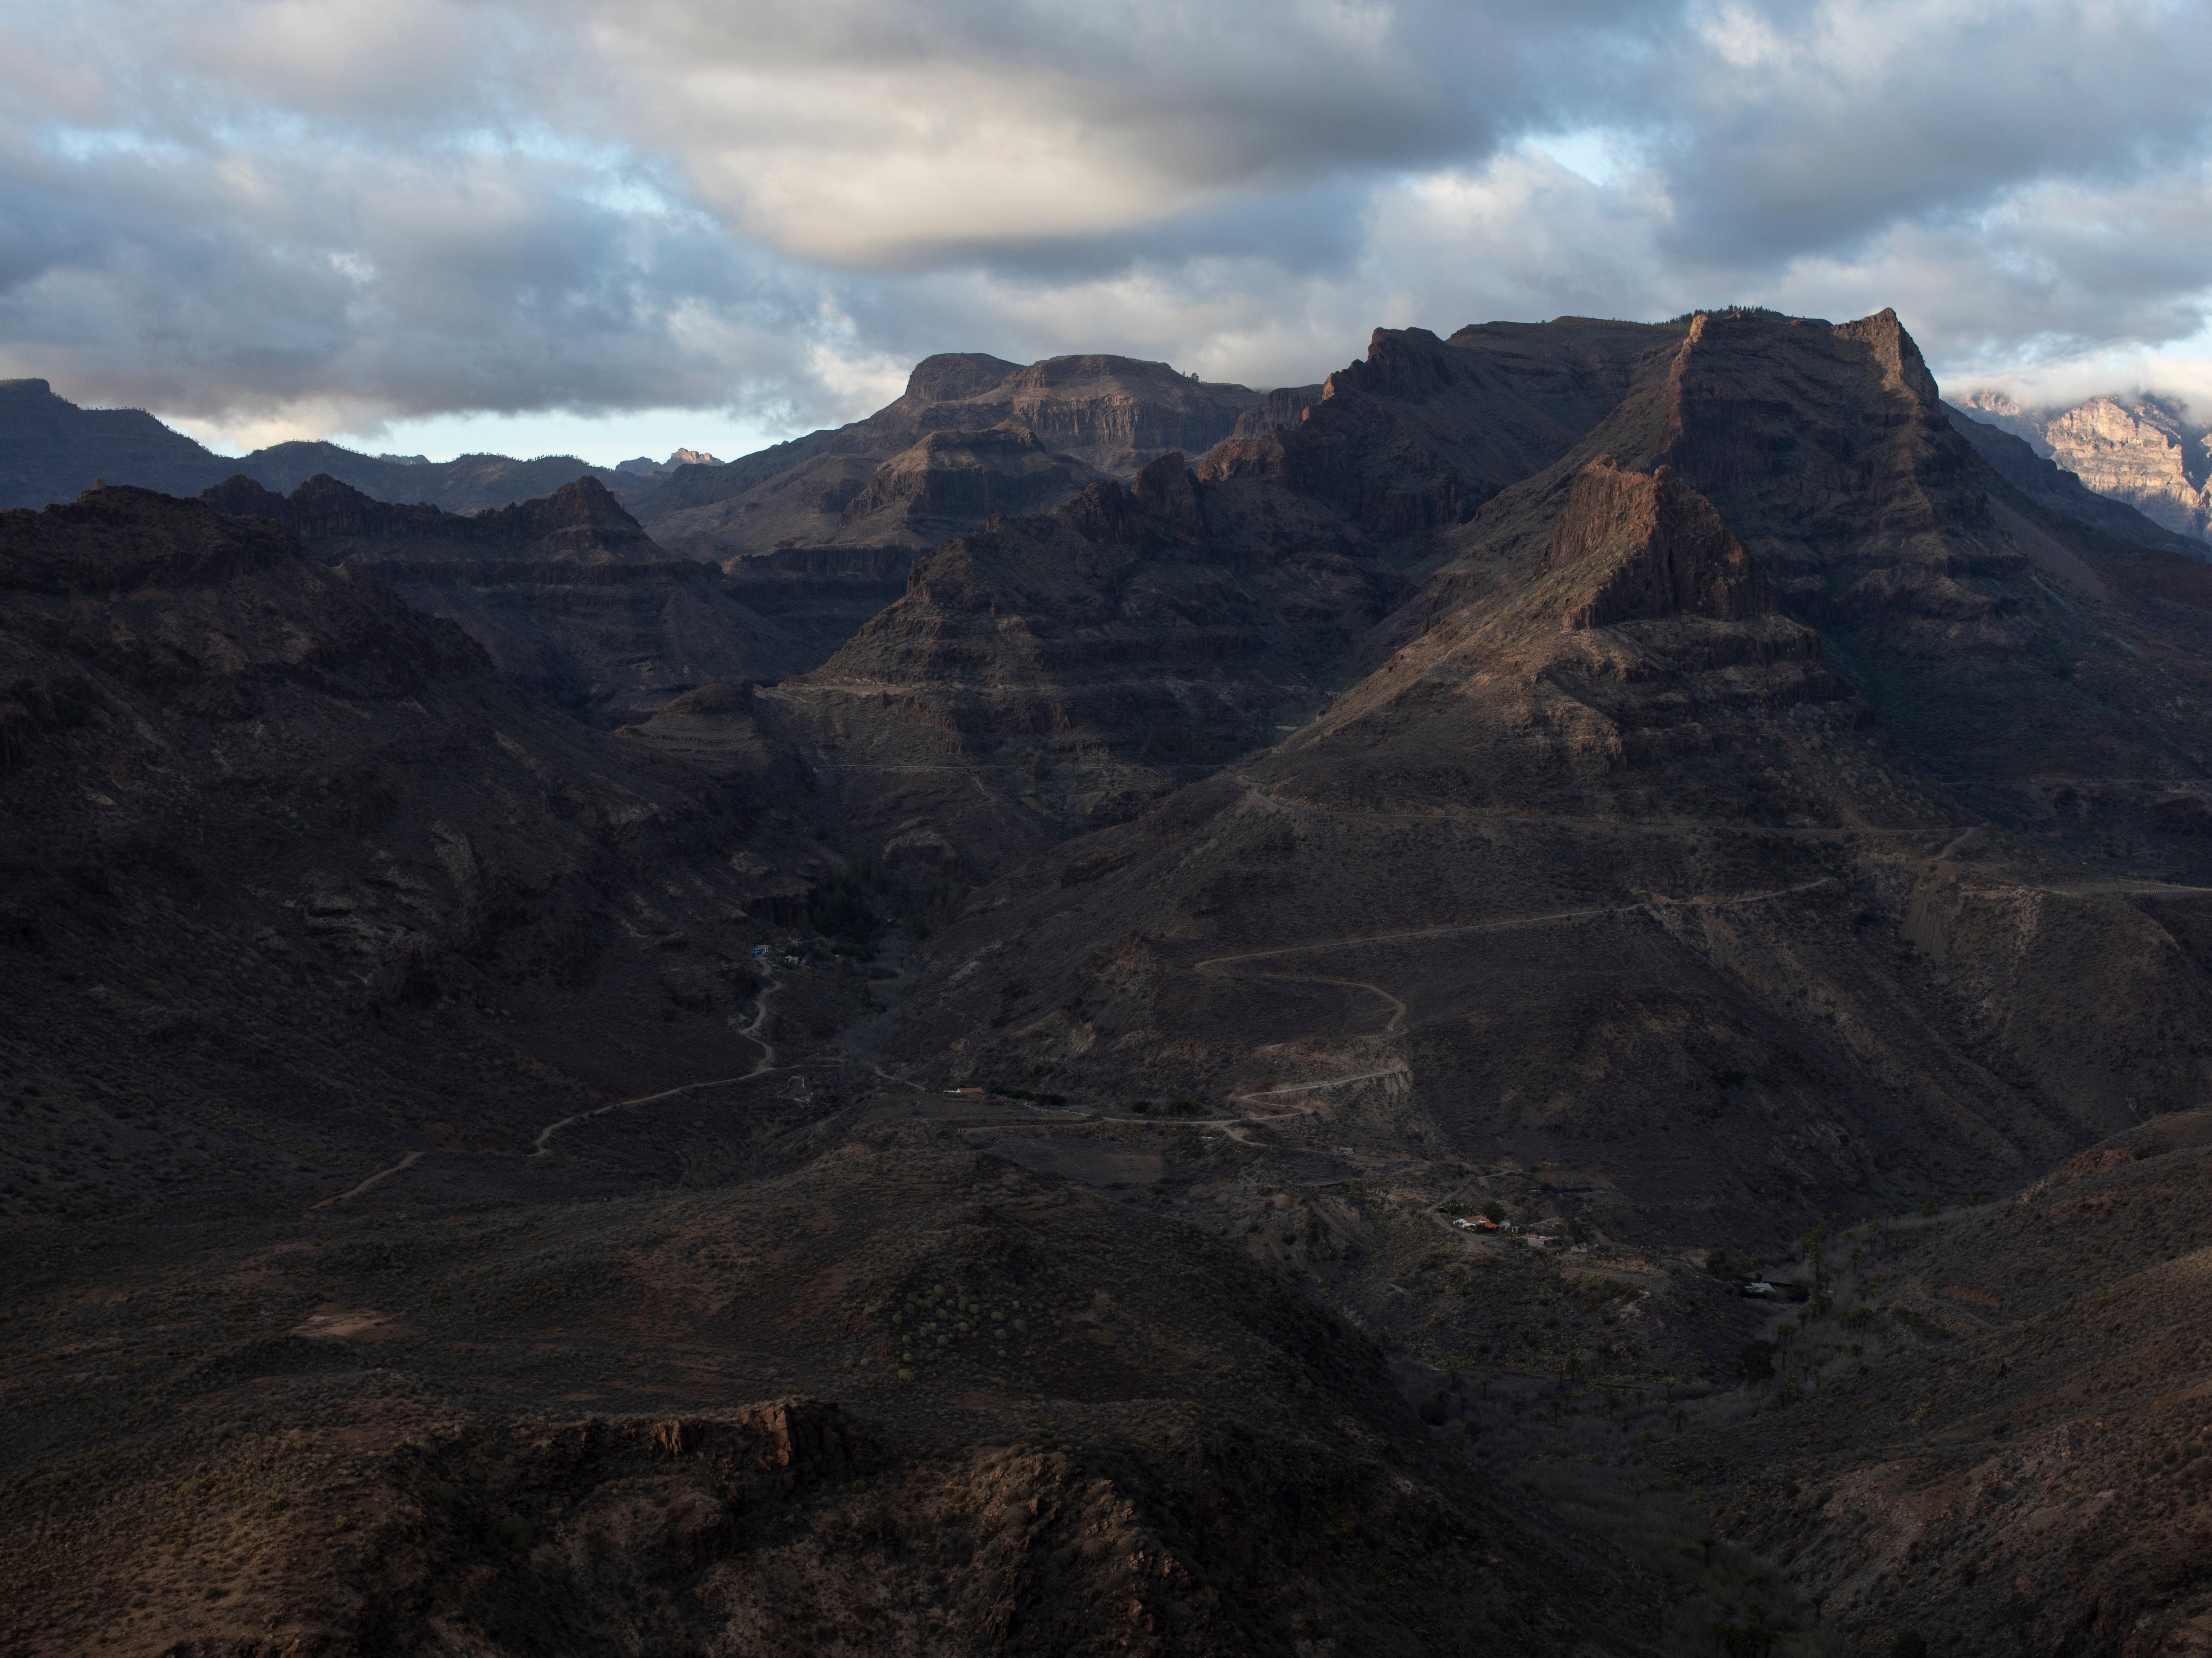 The Spanish island of Gran Canaria requires travellers to drive through steep mountain ranges